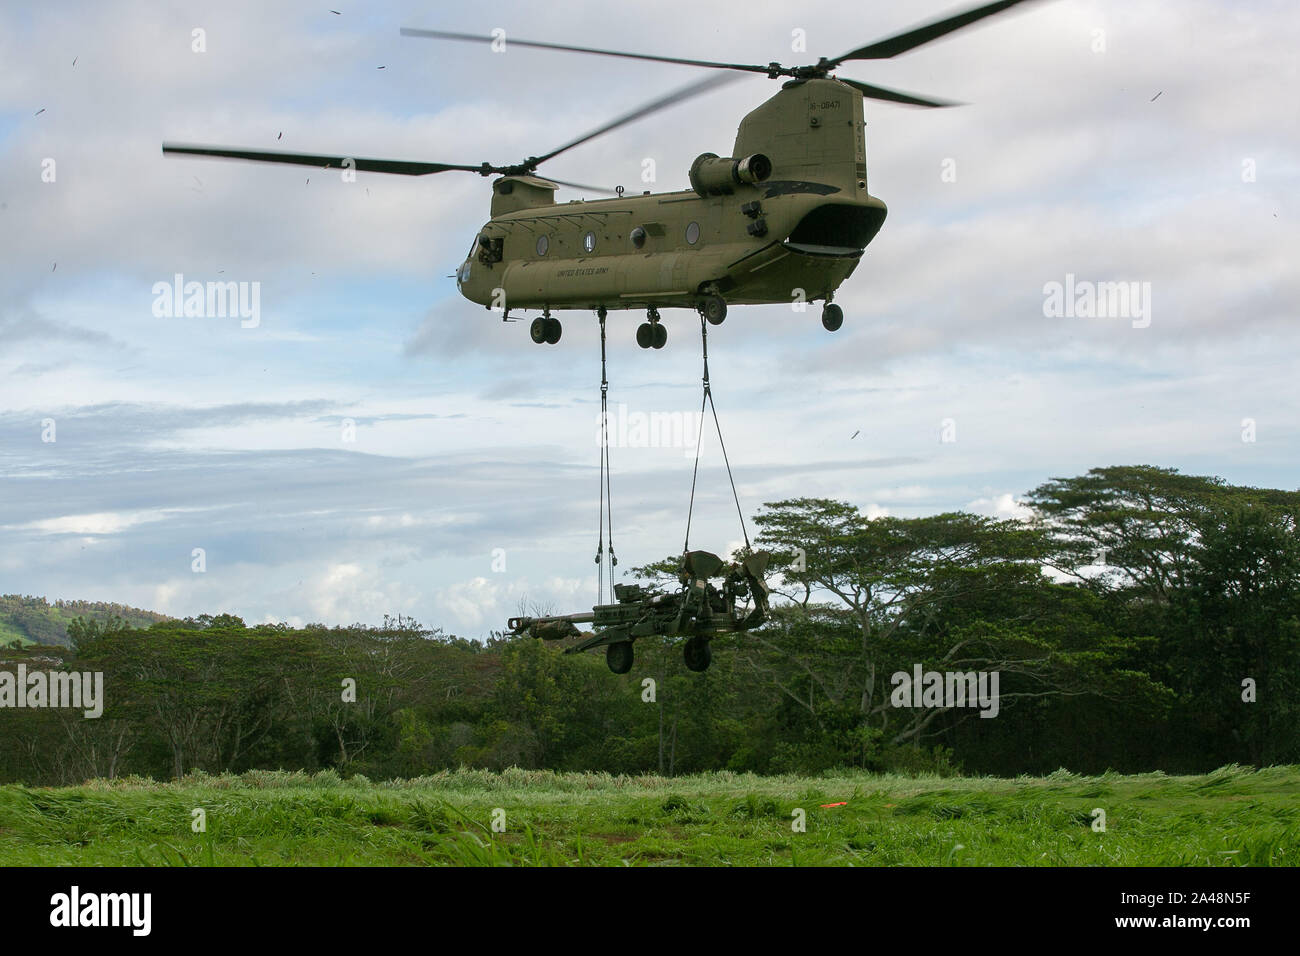 U.S. Army CH-47 Chinook helicopter assigned to 3rd Battalion, 25th Aviation Regiment provided air and troop lift capability during a live-fire air assault artillery raid on Schofield Barracks, Hawaii, October 10, 2019. The 25th Combat Aviation Brigade worked alongside Charlie Battery, 2nd Battalion, 11th Field Artillery Regiment on the first live-fire air assault of M777 Howitzers ever conducted on the island of Oahu. (U.S. Army photo by 1st Lt. Ryan DeBooy) Stock Photo